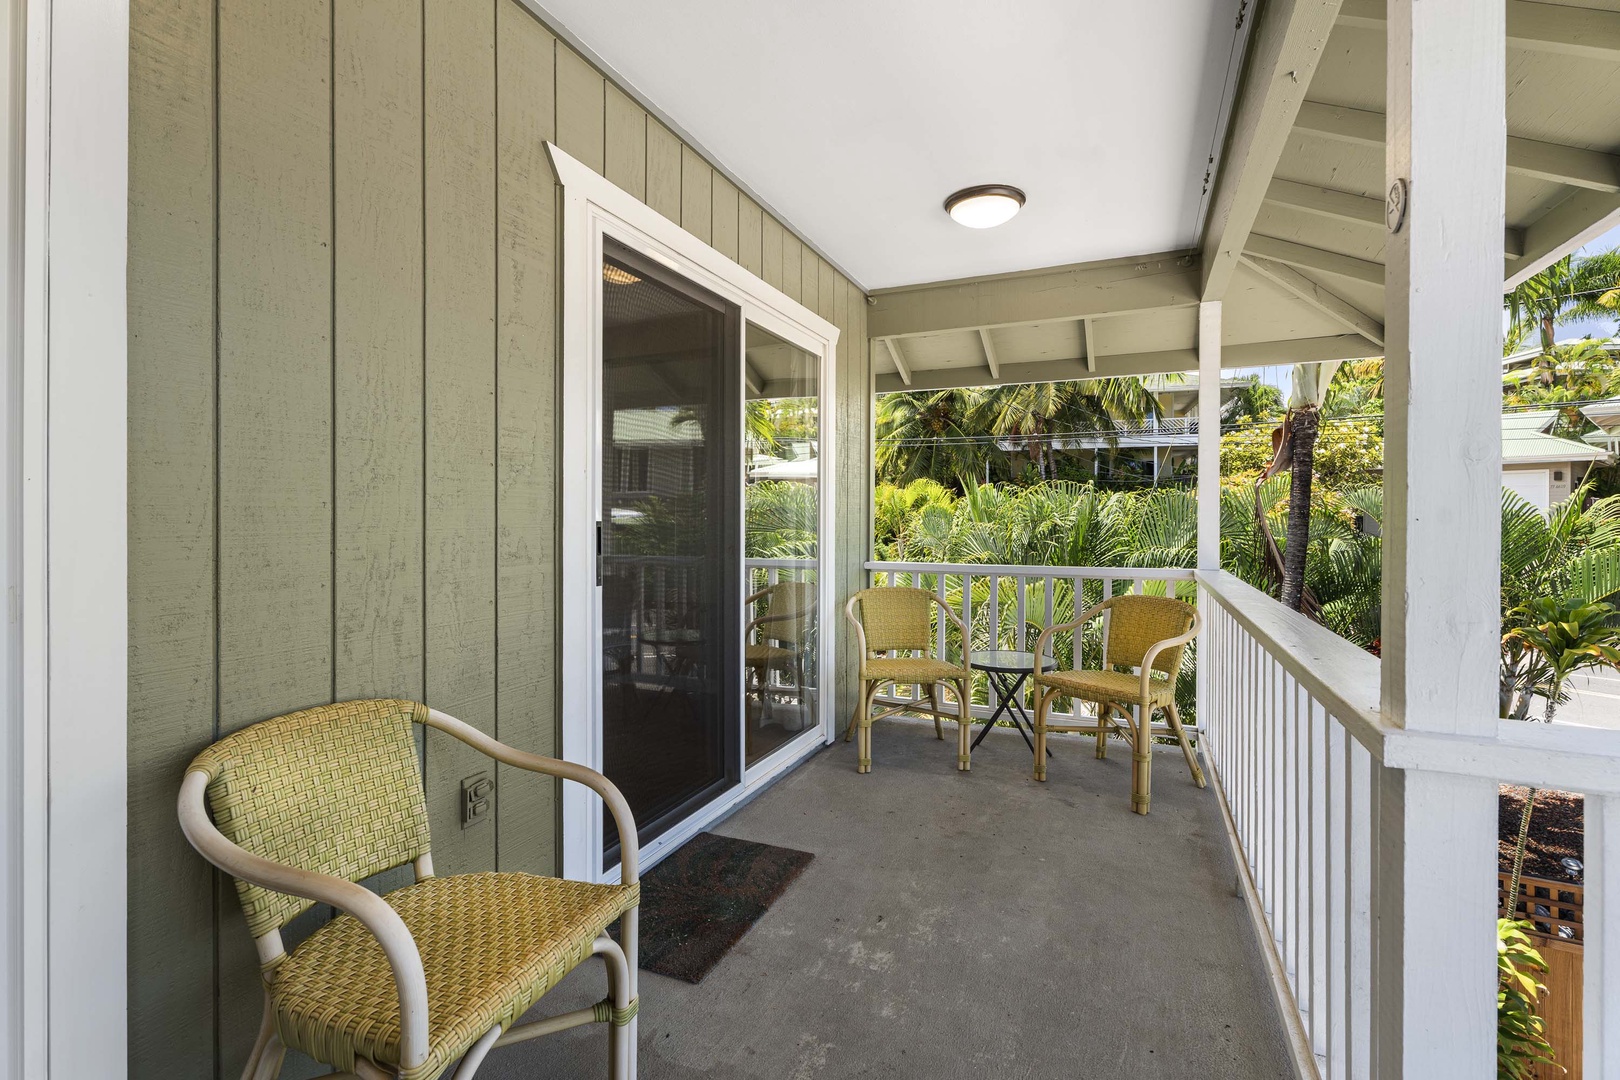 Kailua Kona Vacation Rentals, Hale A Kai - Upstairs Lanai outside of the primary and guest suites